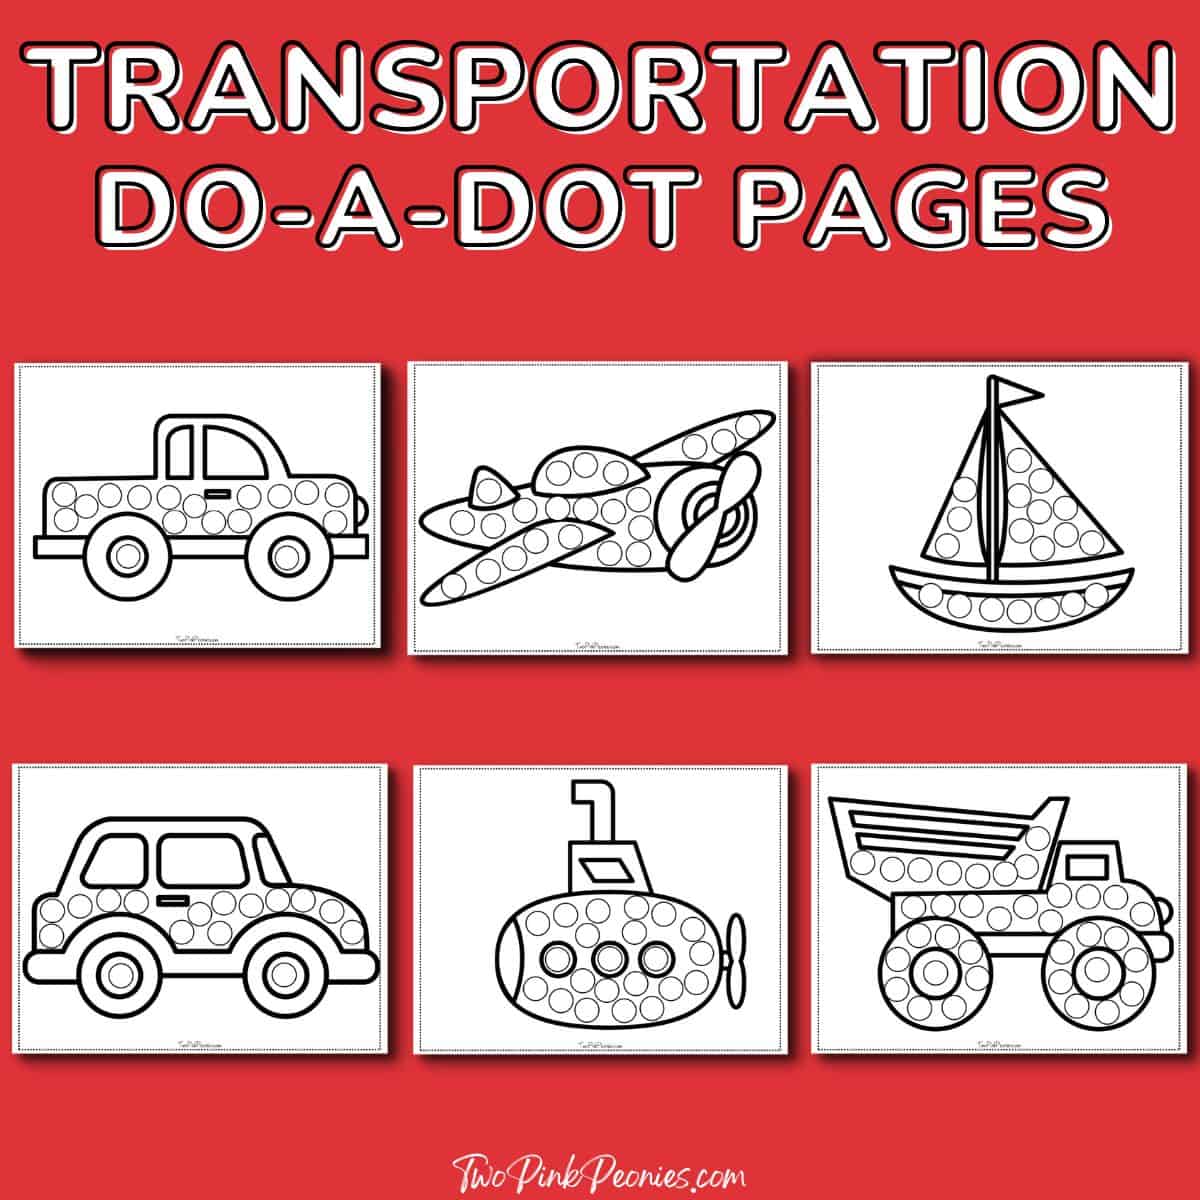 Text that says transportation do-a-dot pages below are mock ups of six dot marker pages. 